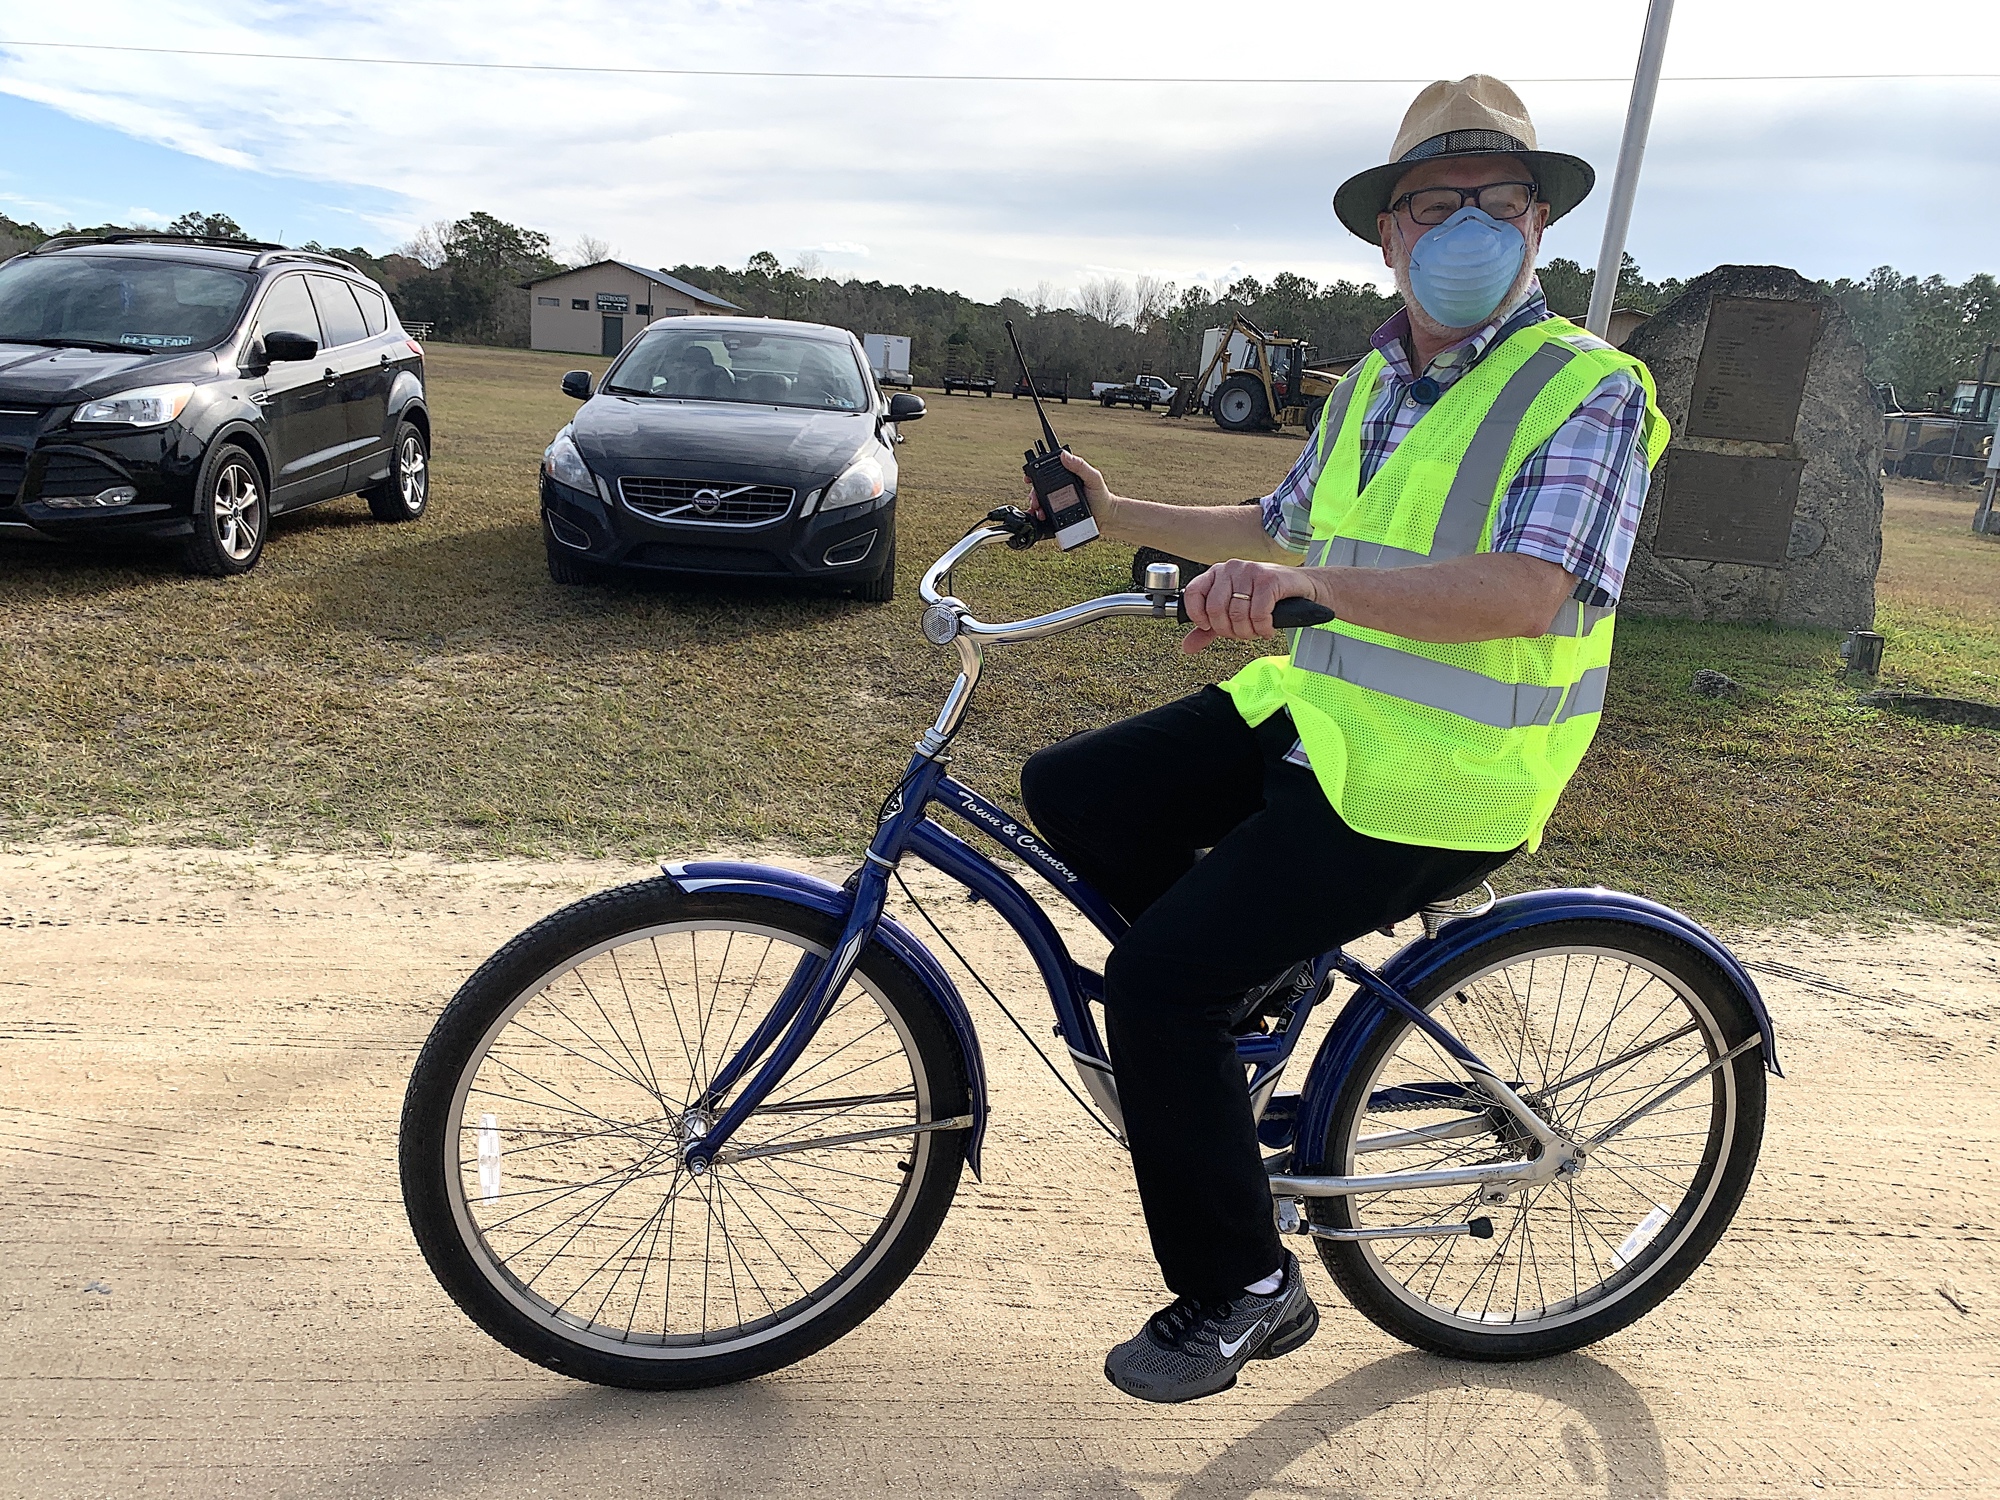 Bob Snyder, DOH health officer, rode his wife's bicycle around the fairgrounds to check on each station and boost morale.